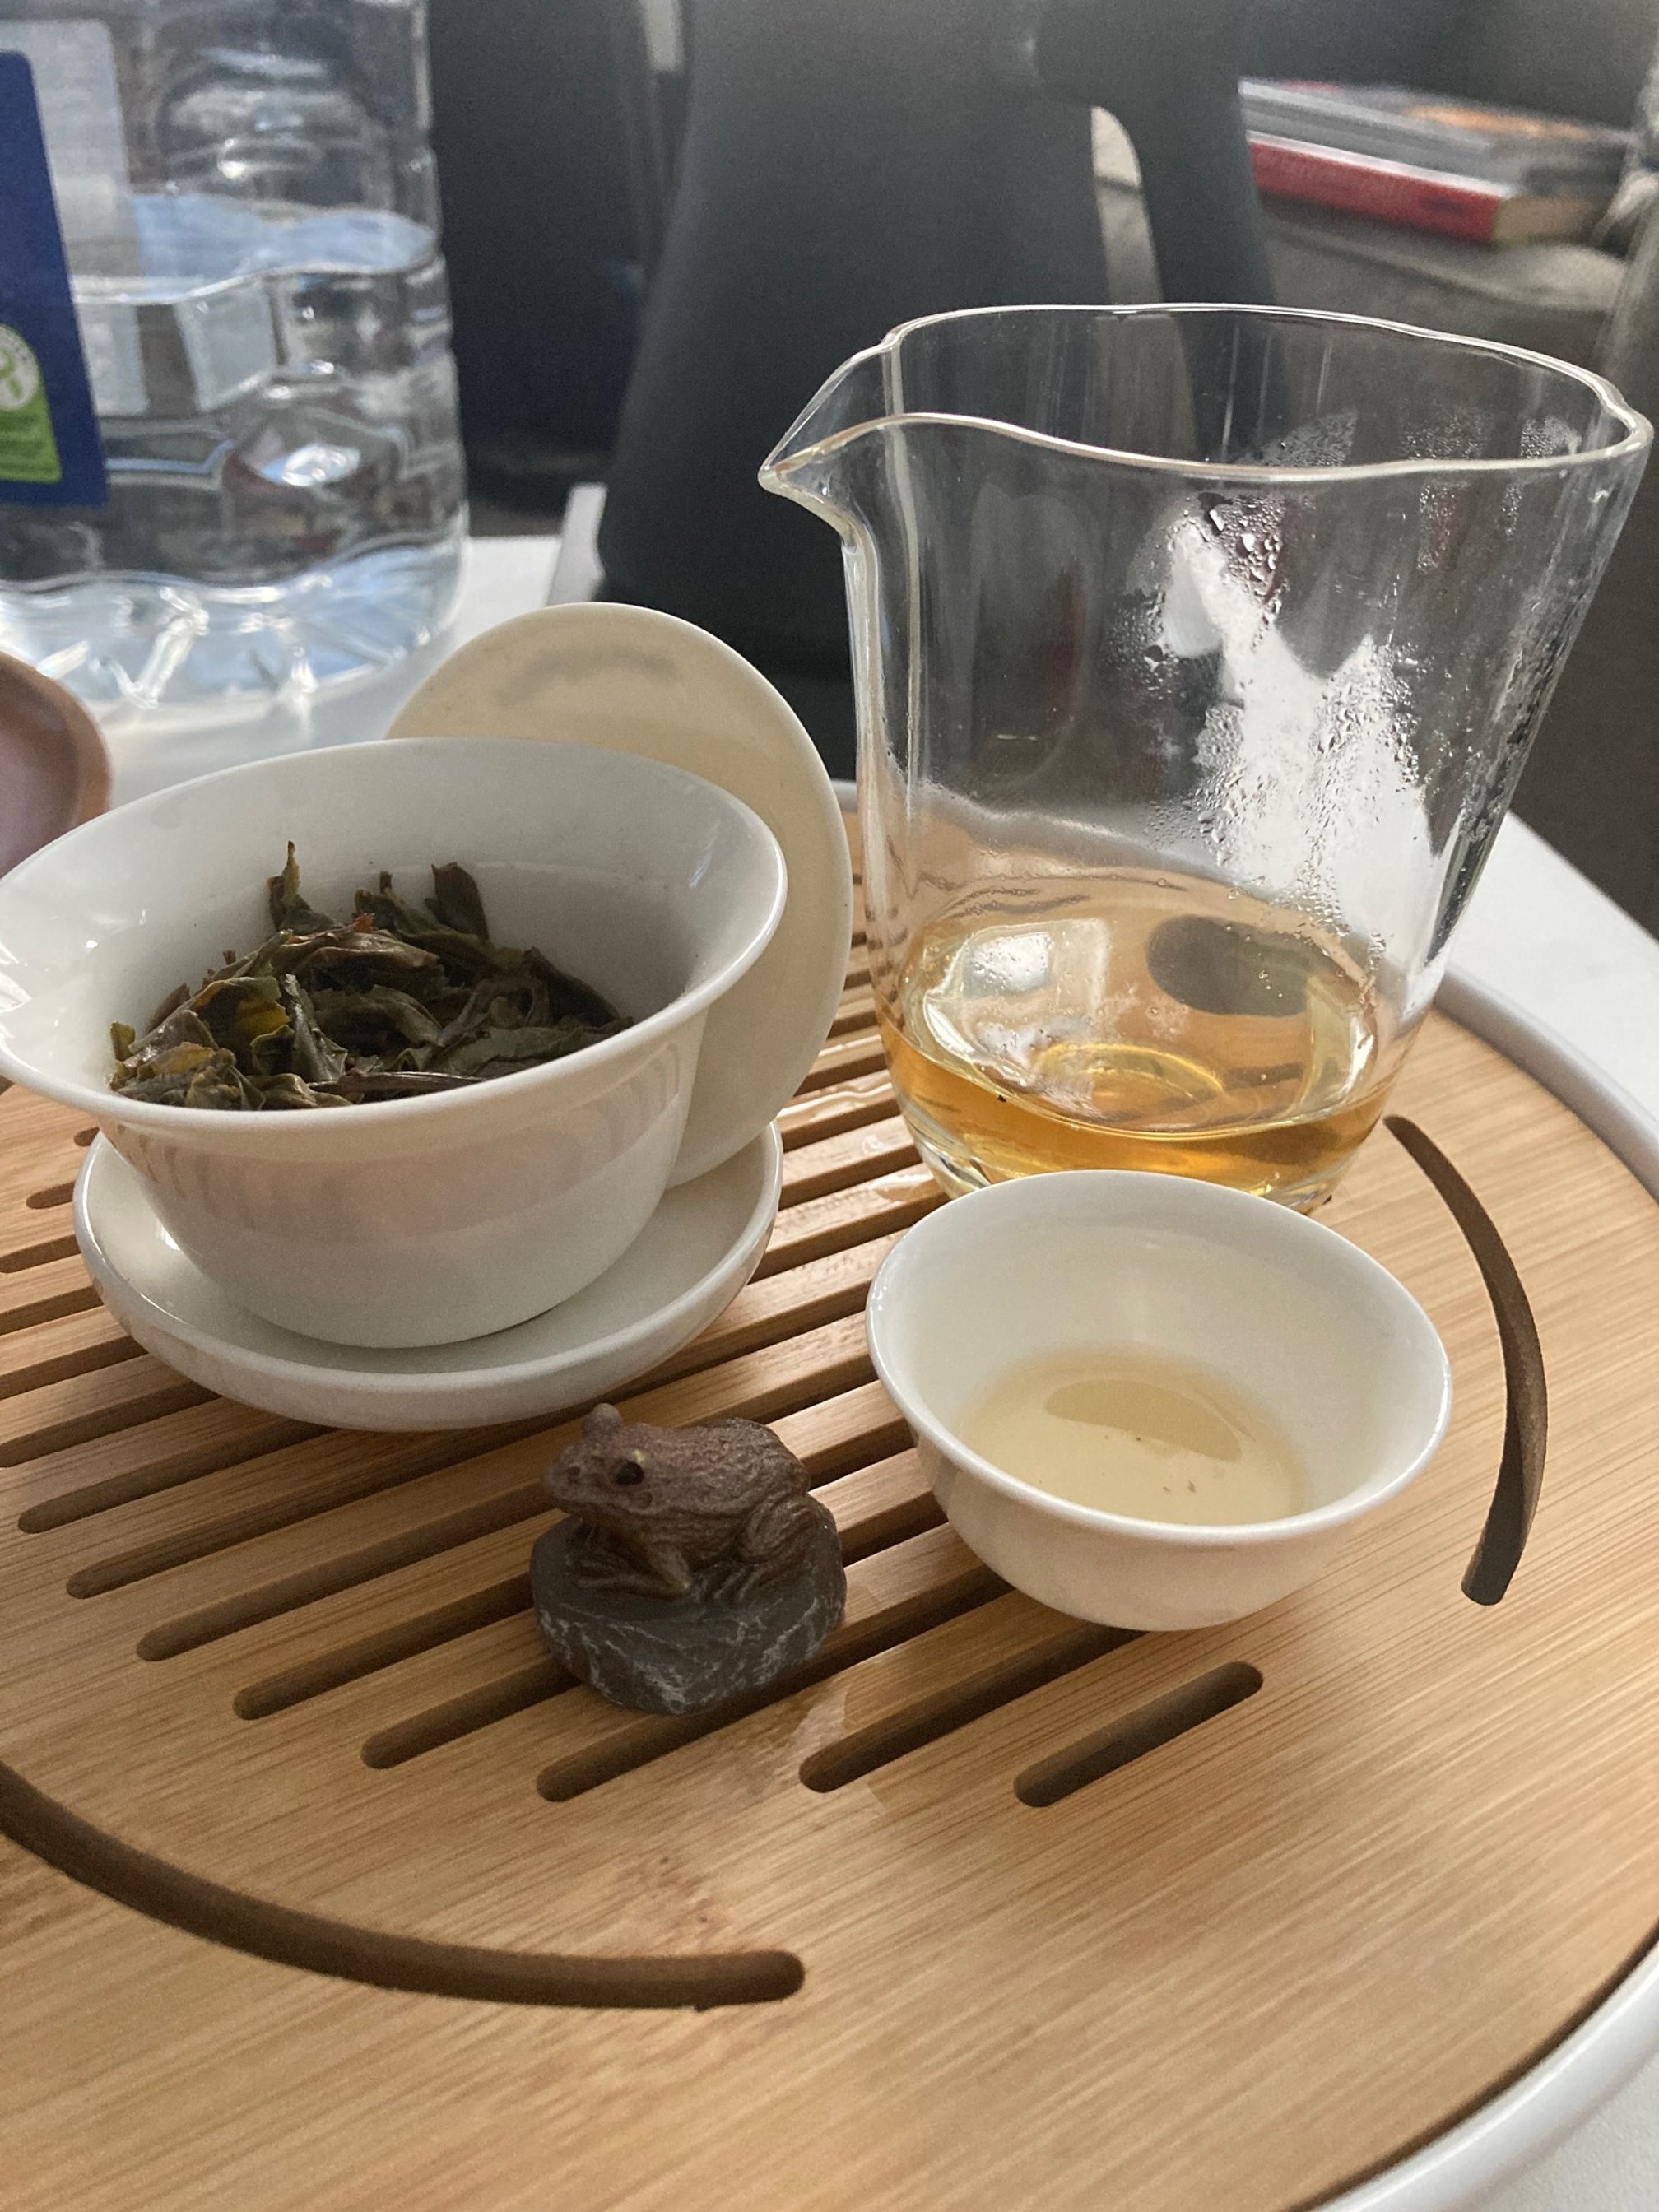 Froggy and gaiwan